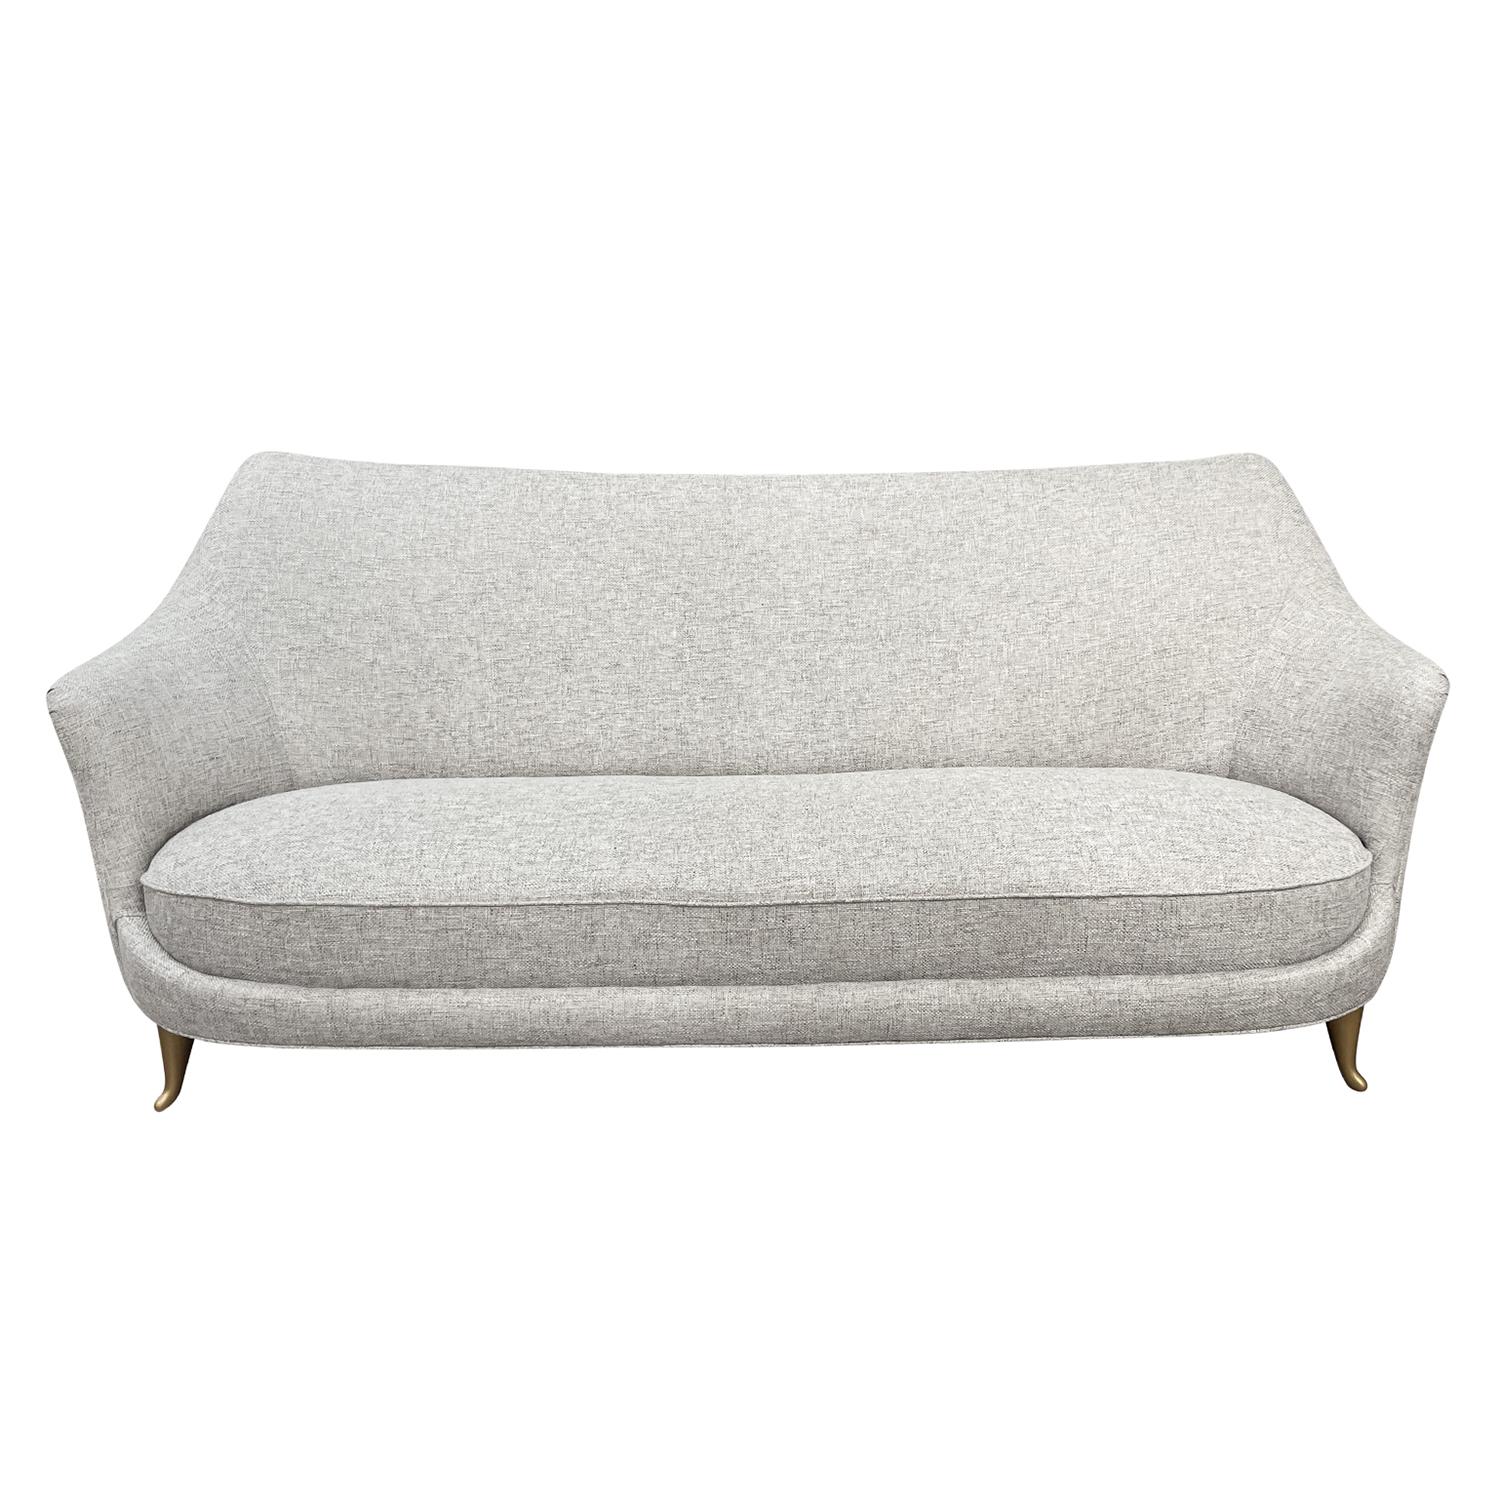 Metal 20th Century Grey Italian Two Seater Sofa, Vintage Canapé by ISA Bergamo For Sale